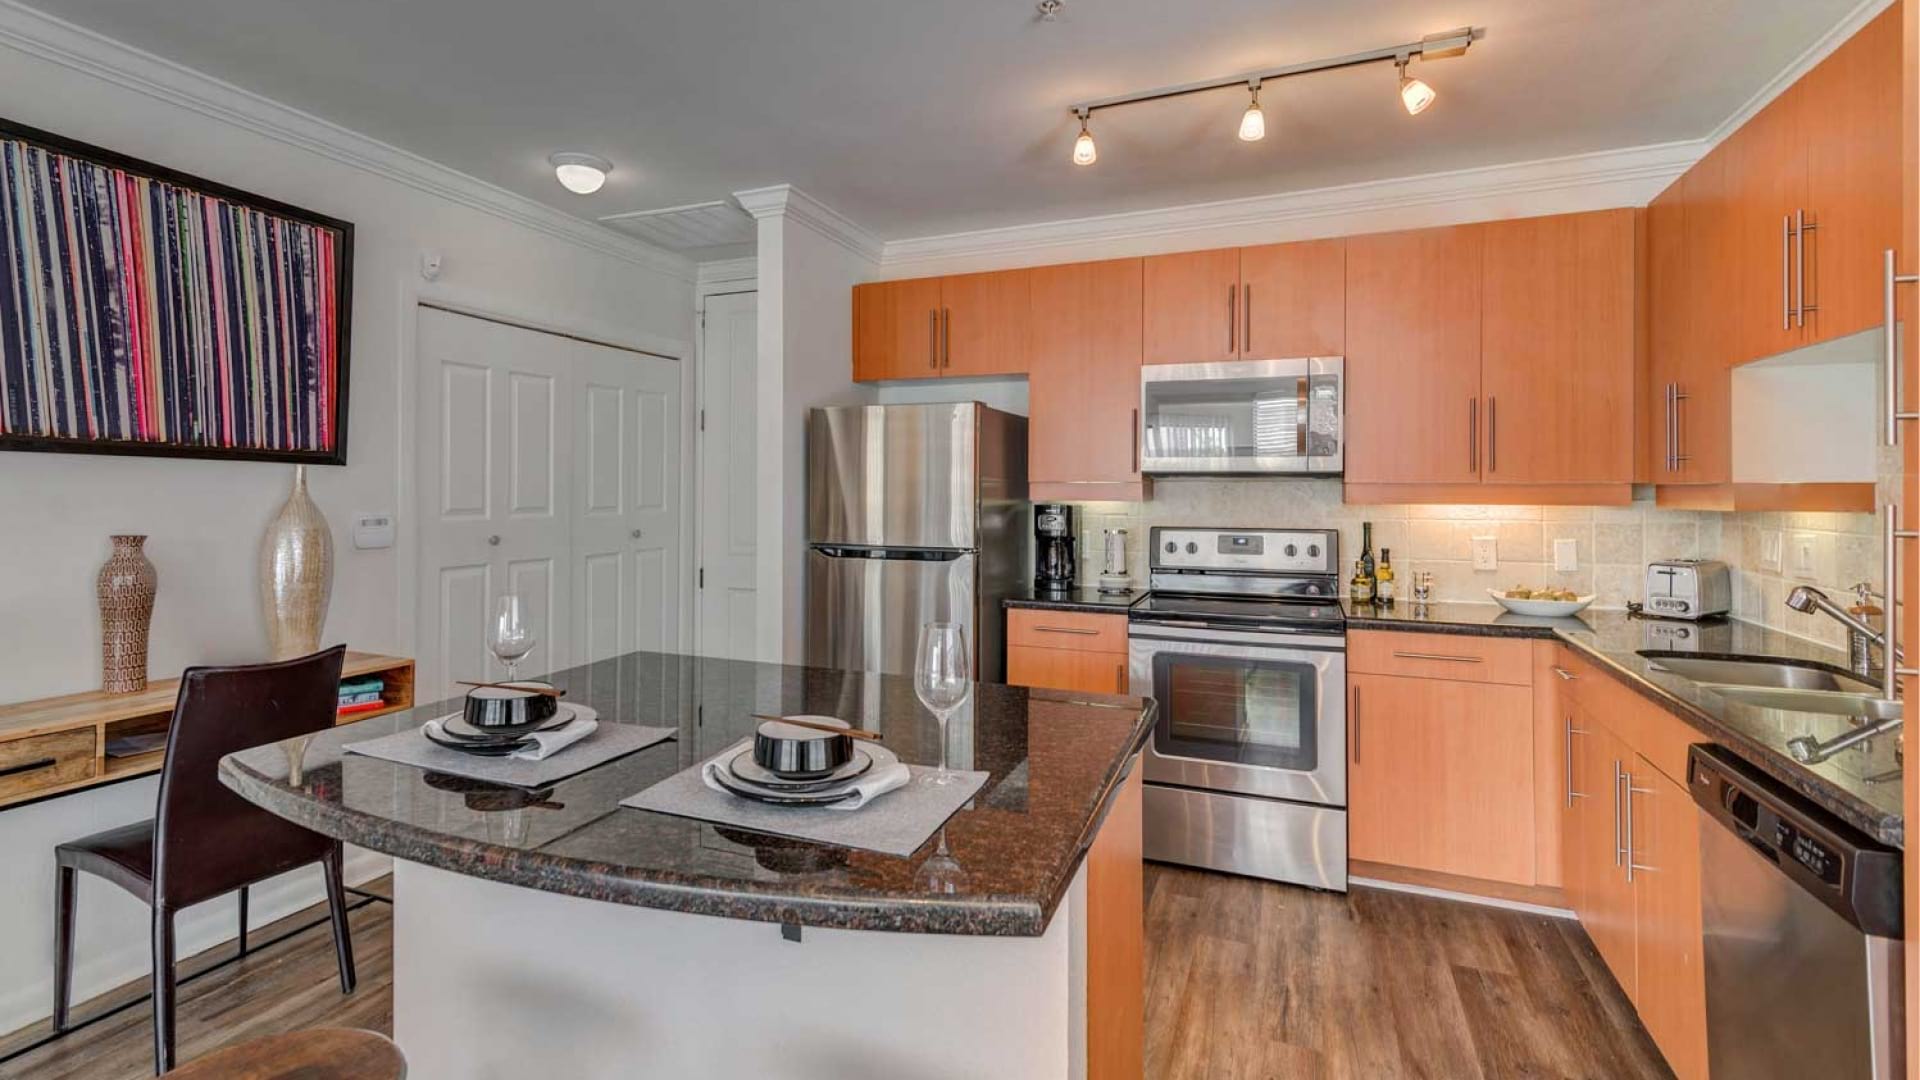 Kitchen with Energy-Efficient, Stainless Steel Appliances and Cabinets for Storage at Our  Uptown Dallas Apartments for Rent